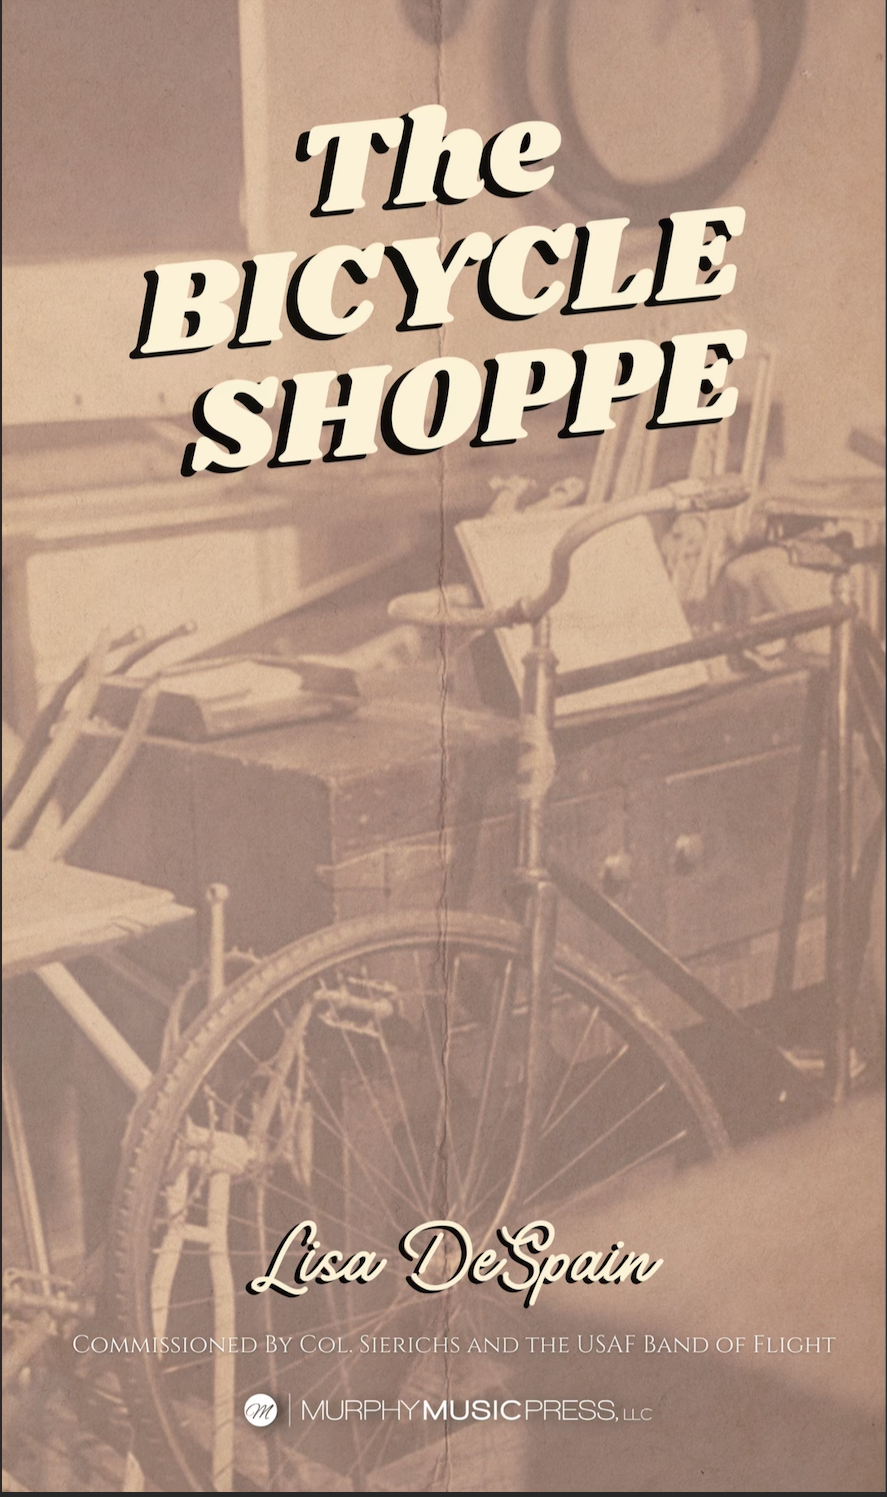 The Bicycle Shoppe by Lisa DeSpain